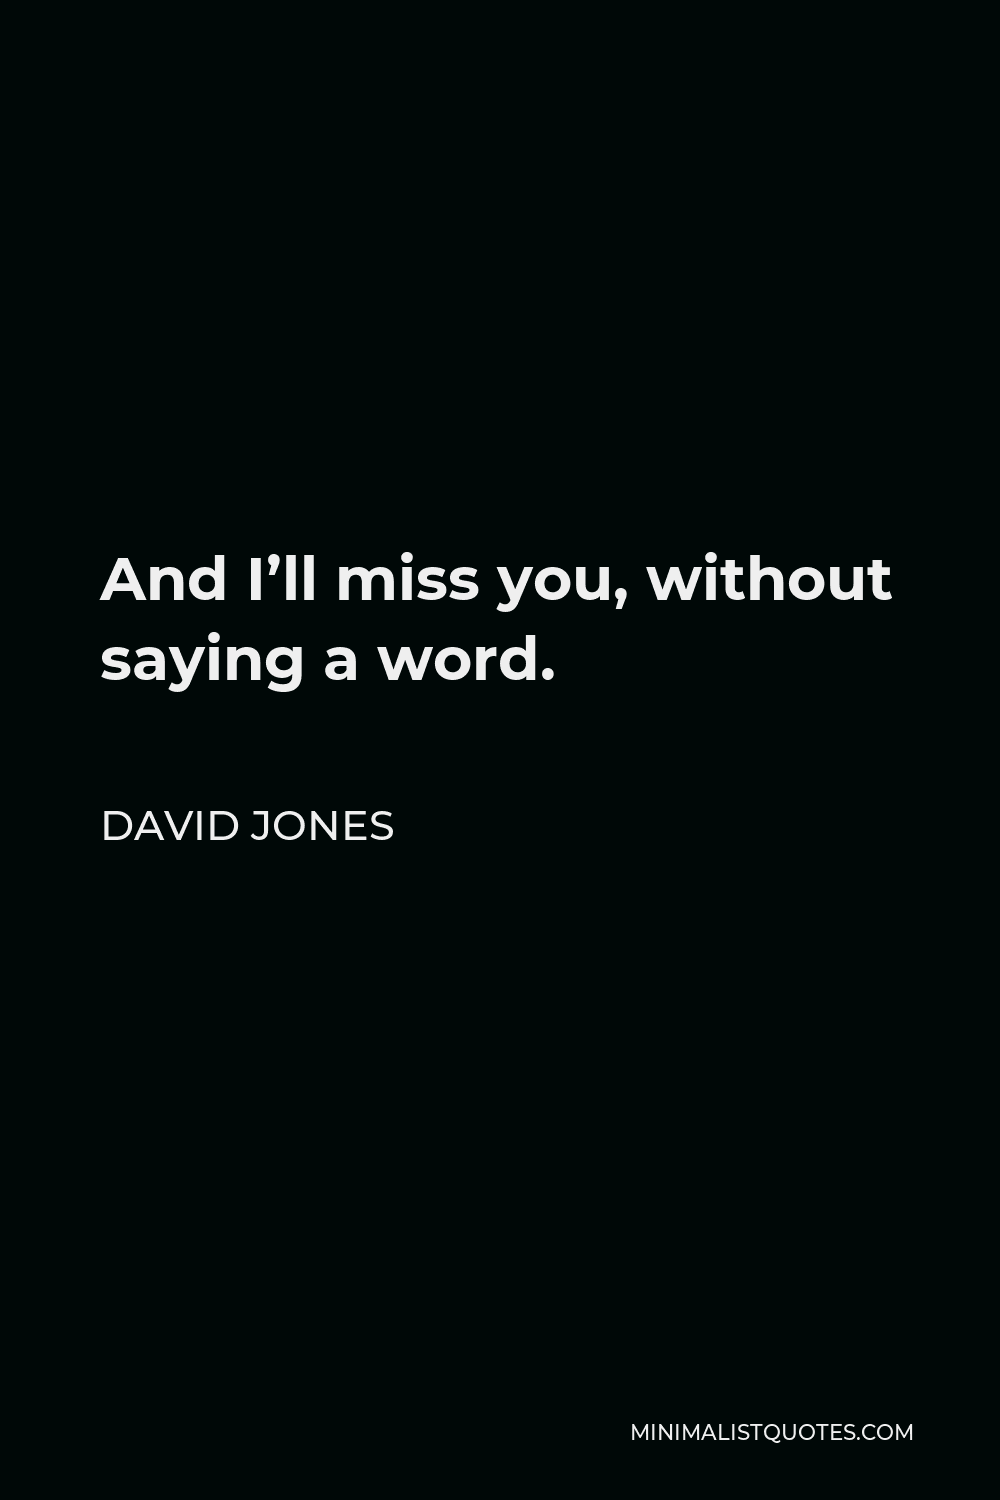 David Jones Quote - And I’ll miss you, without saying a word.